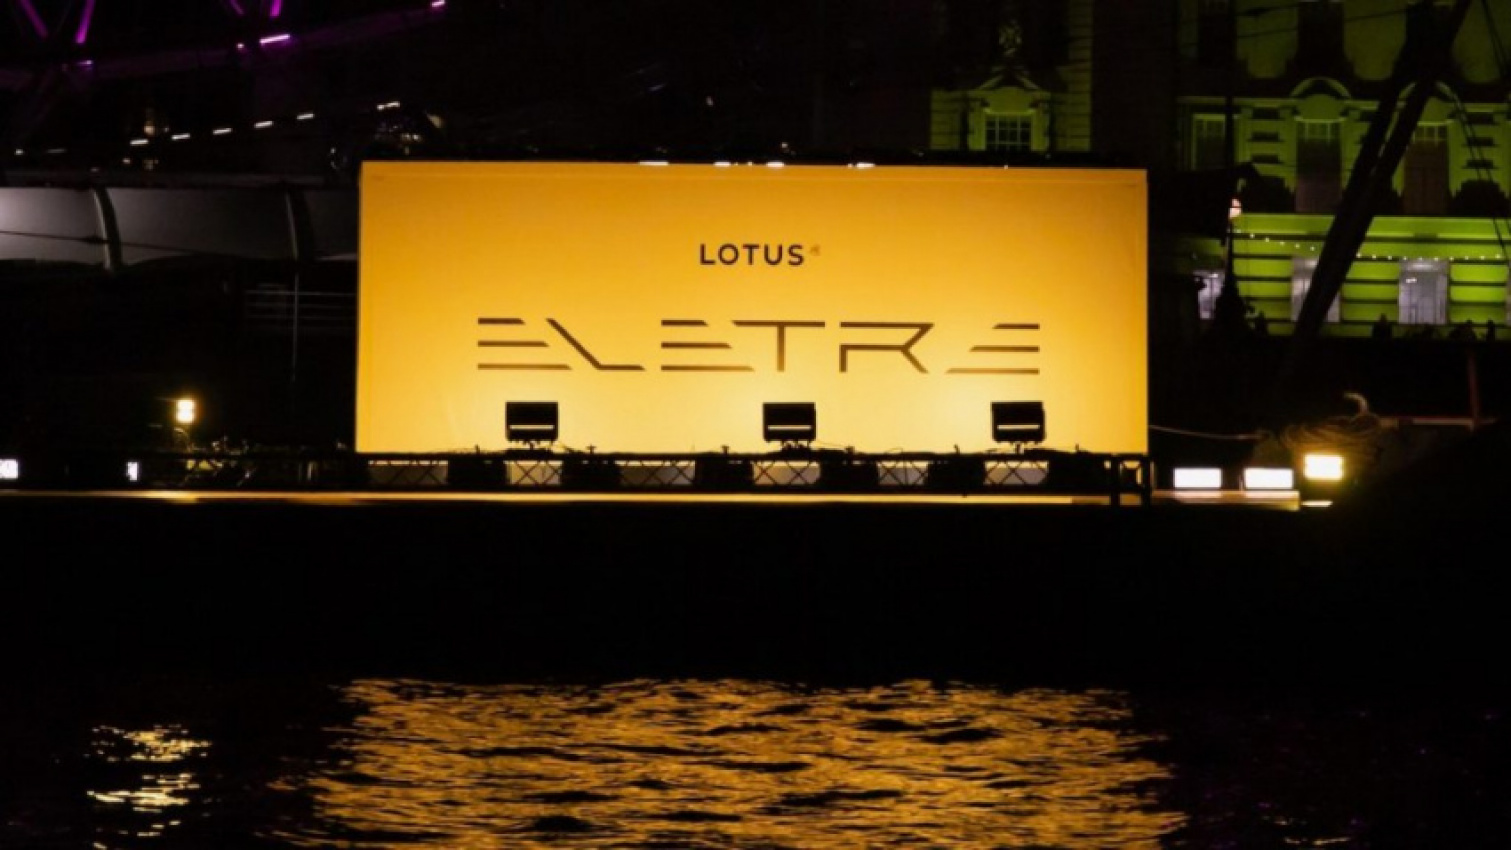 autos, cars, lotus, eletre, luxury suv, lotus eletre luxury suv reveal, only hours until the excitement begins